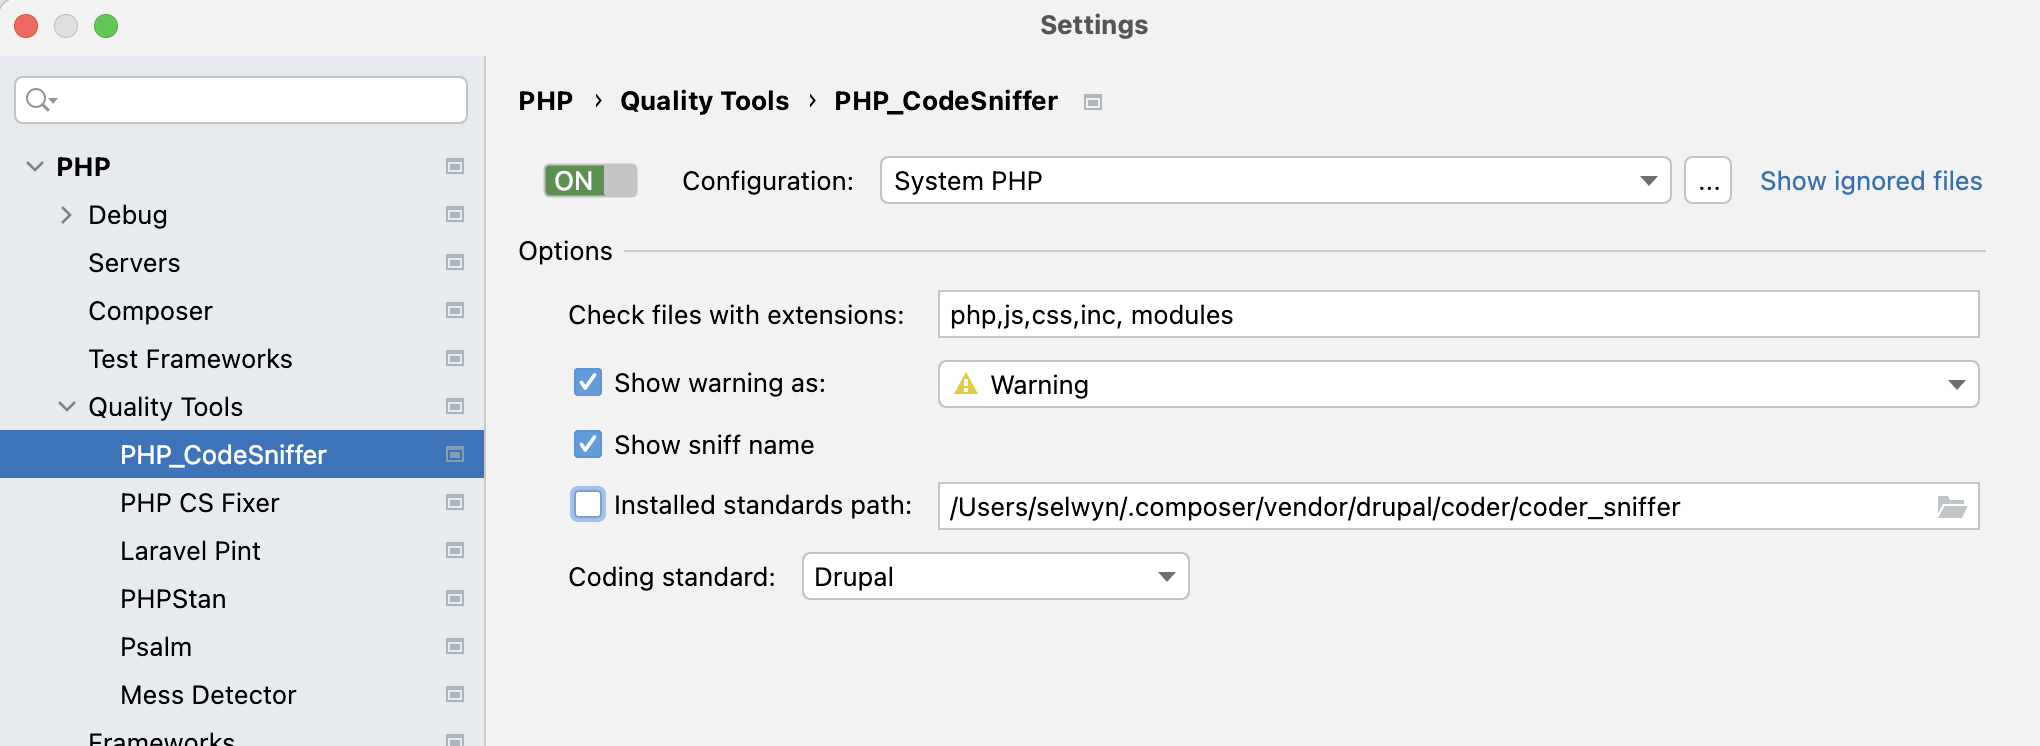 Image of PHP Codesniffer settings